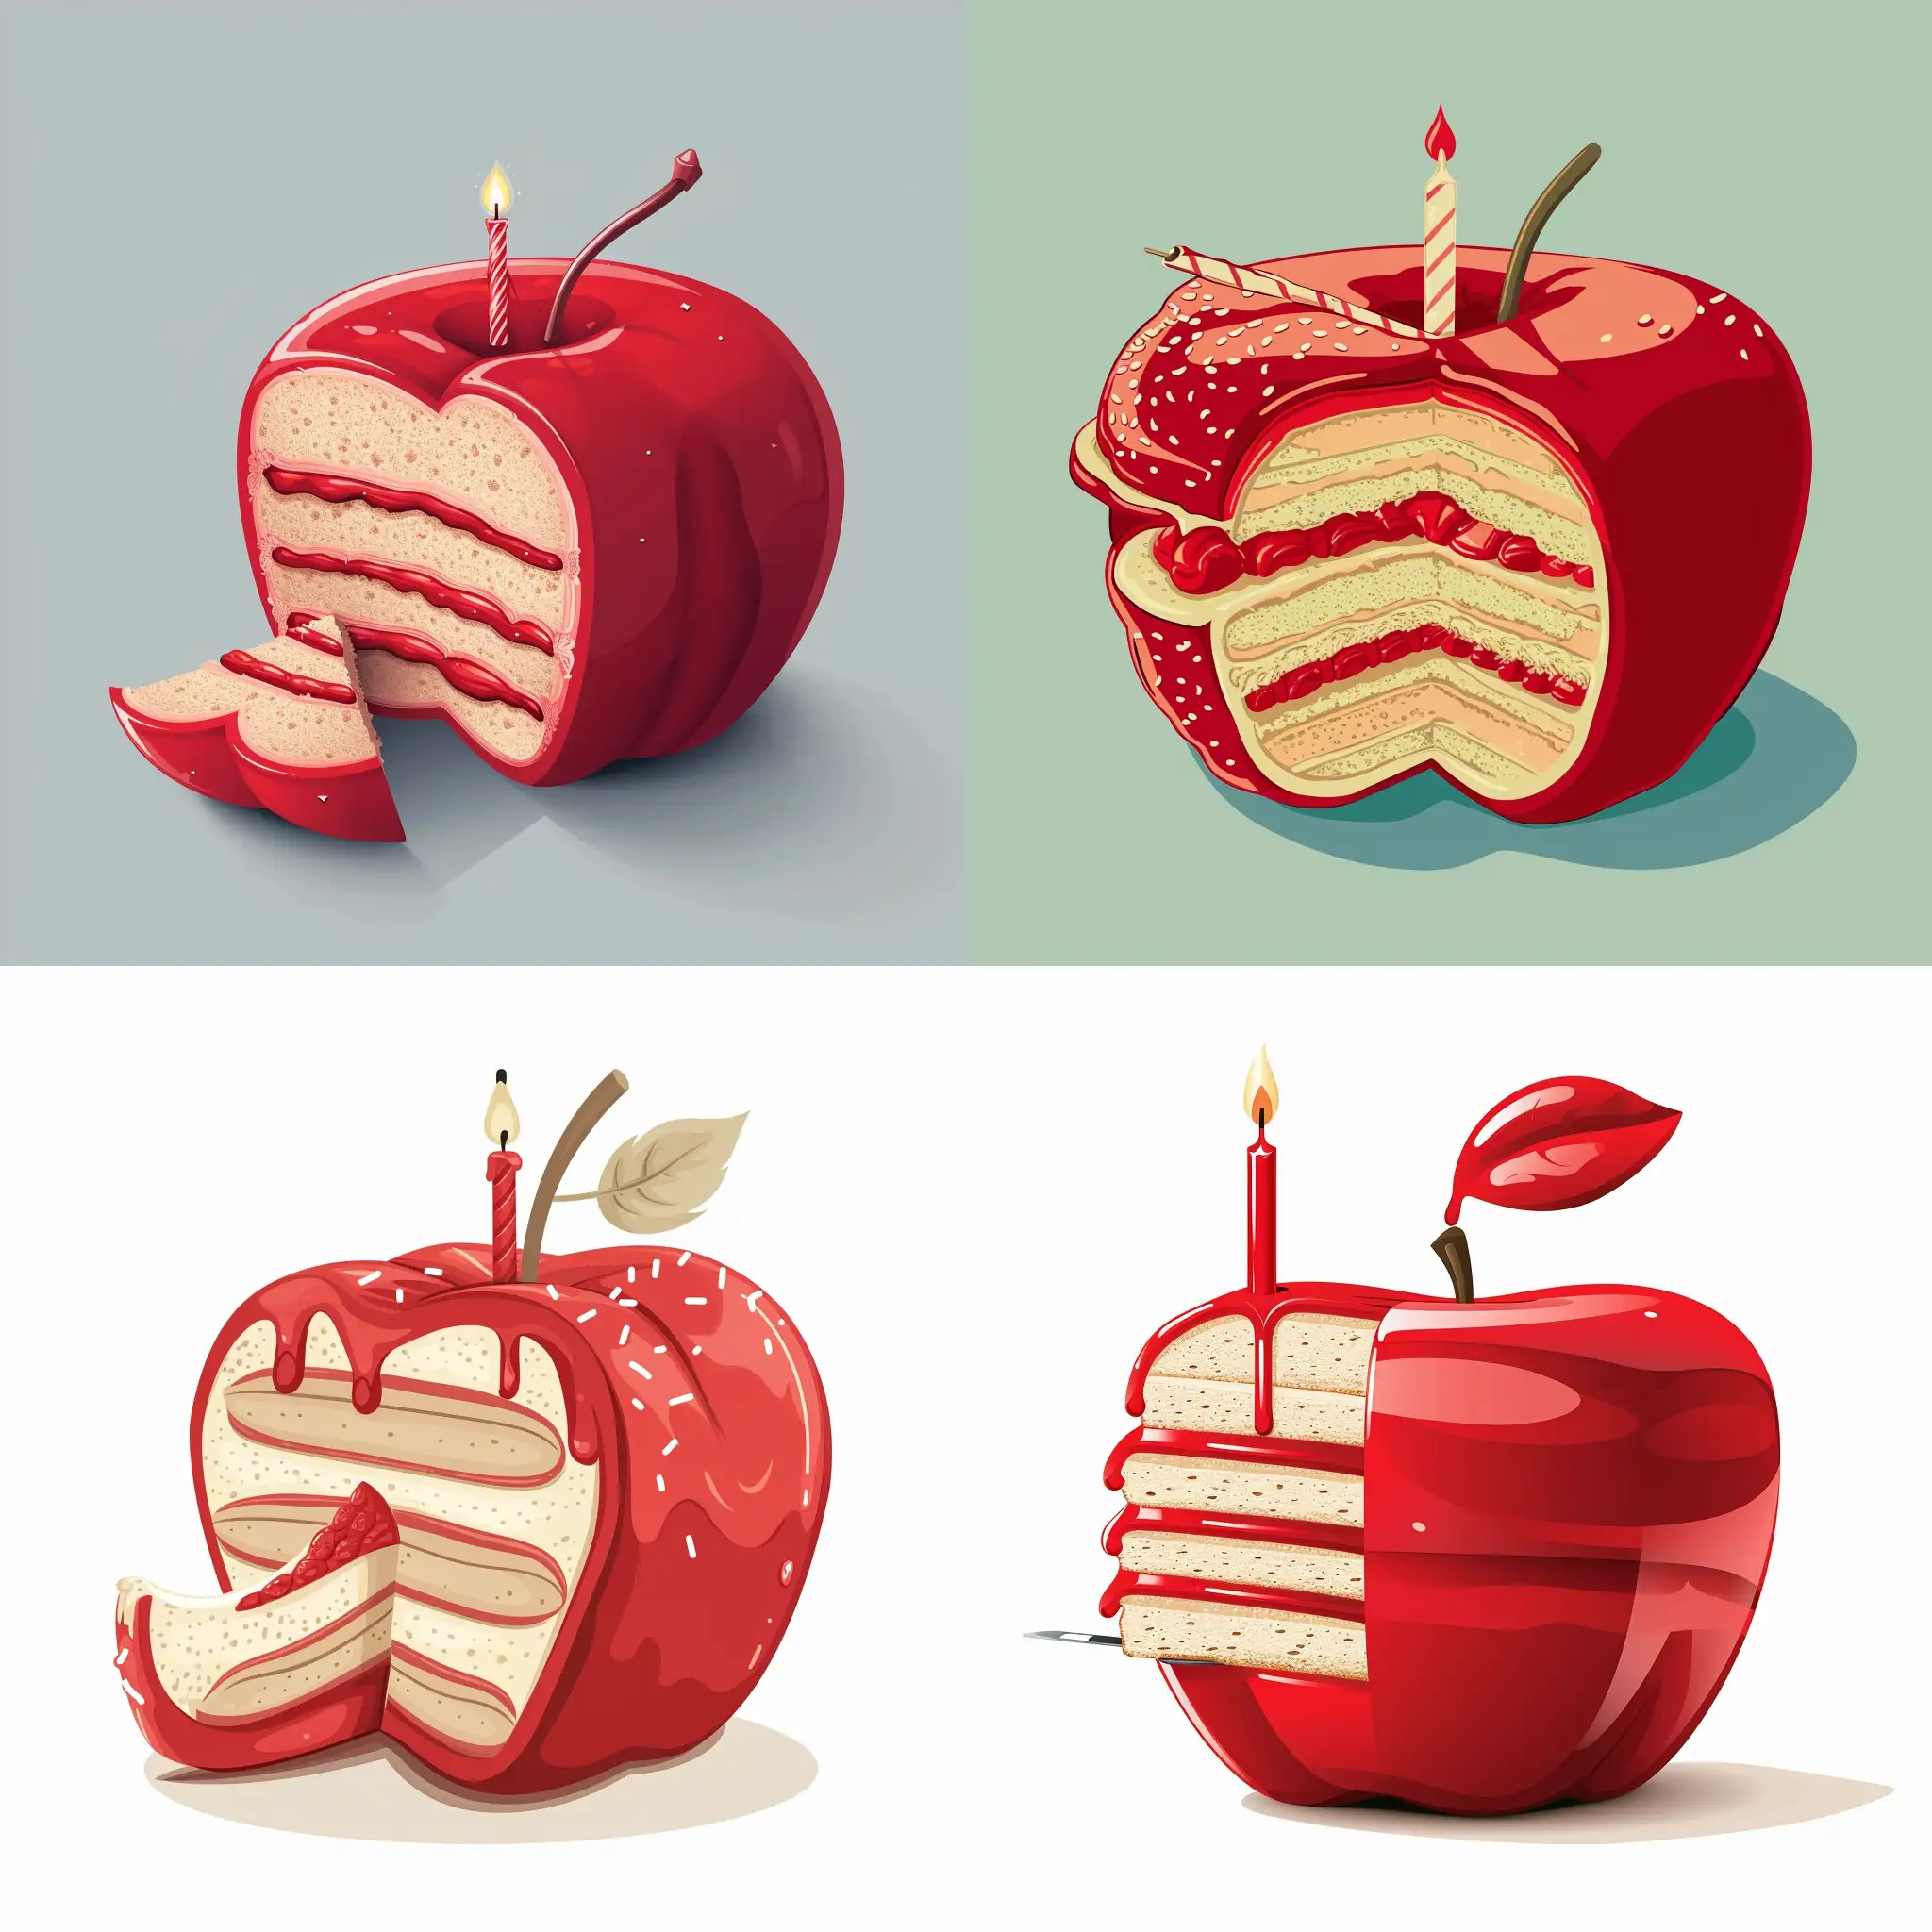 Delicious-Red-AppleShaped-Birthday-Cake-with-a-Bite